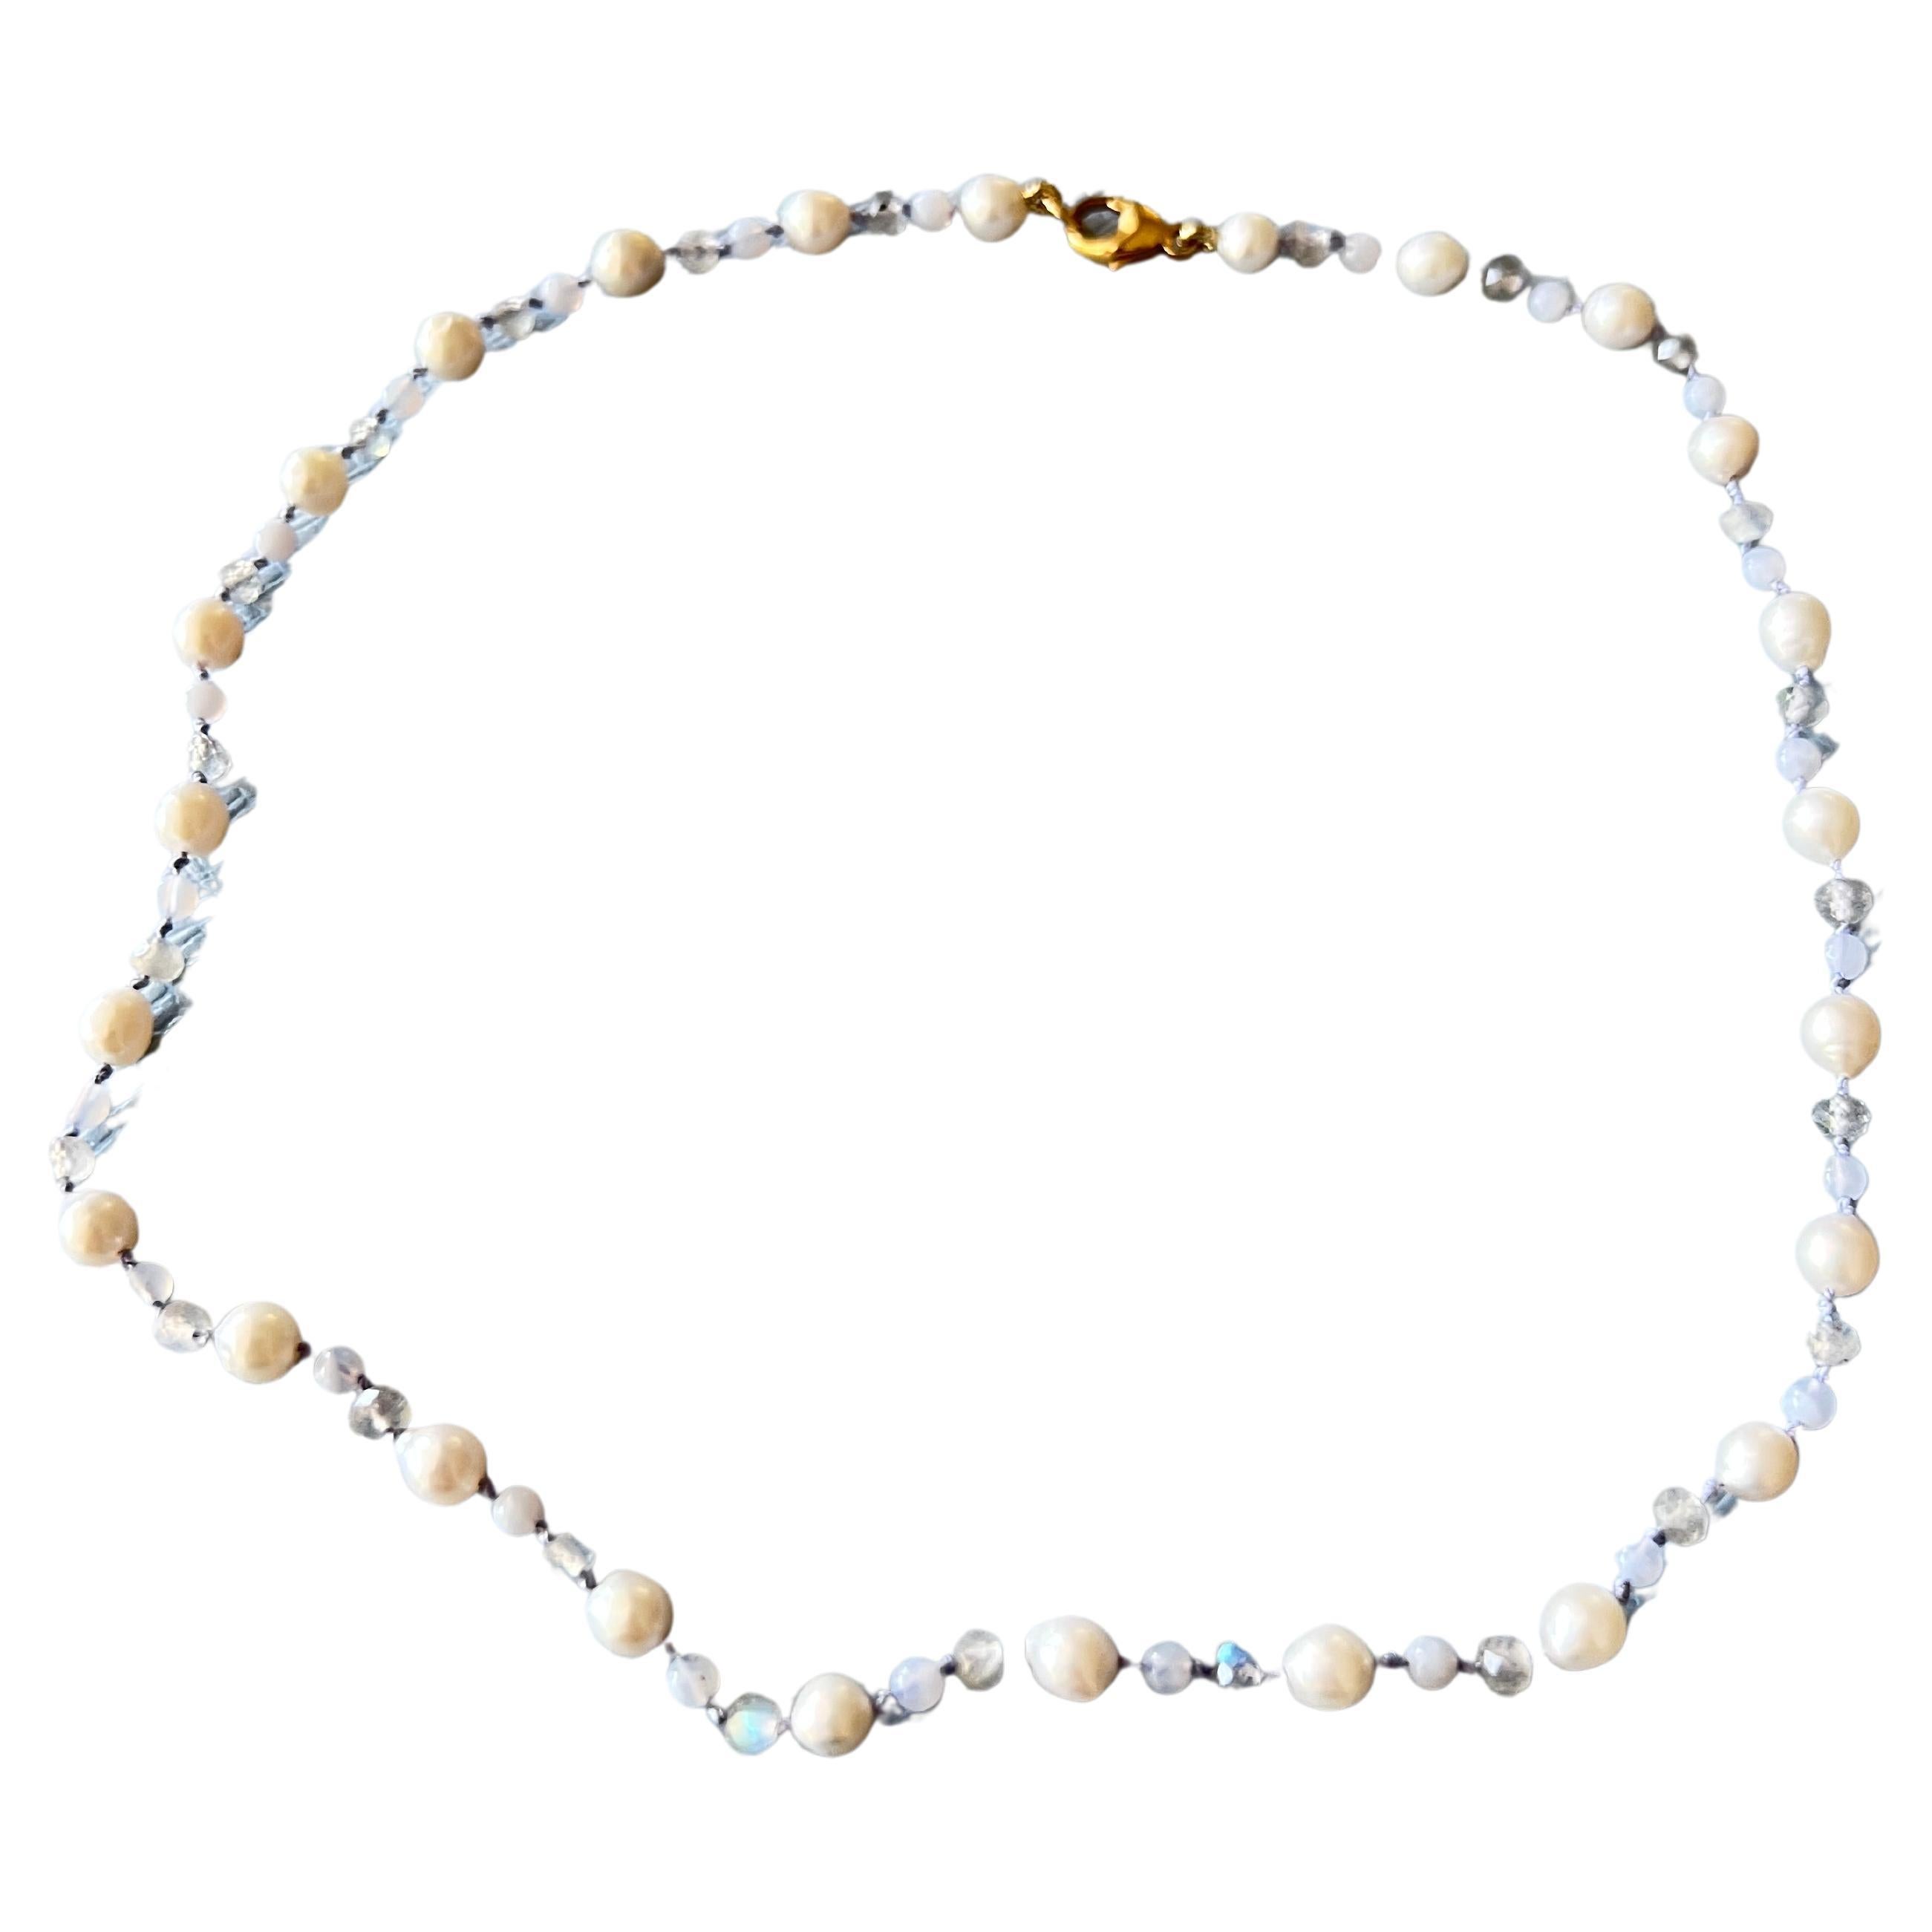 White Pearl Labradorite Blue Lace Agate Choker Necklace J Dauphin For Sale